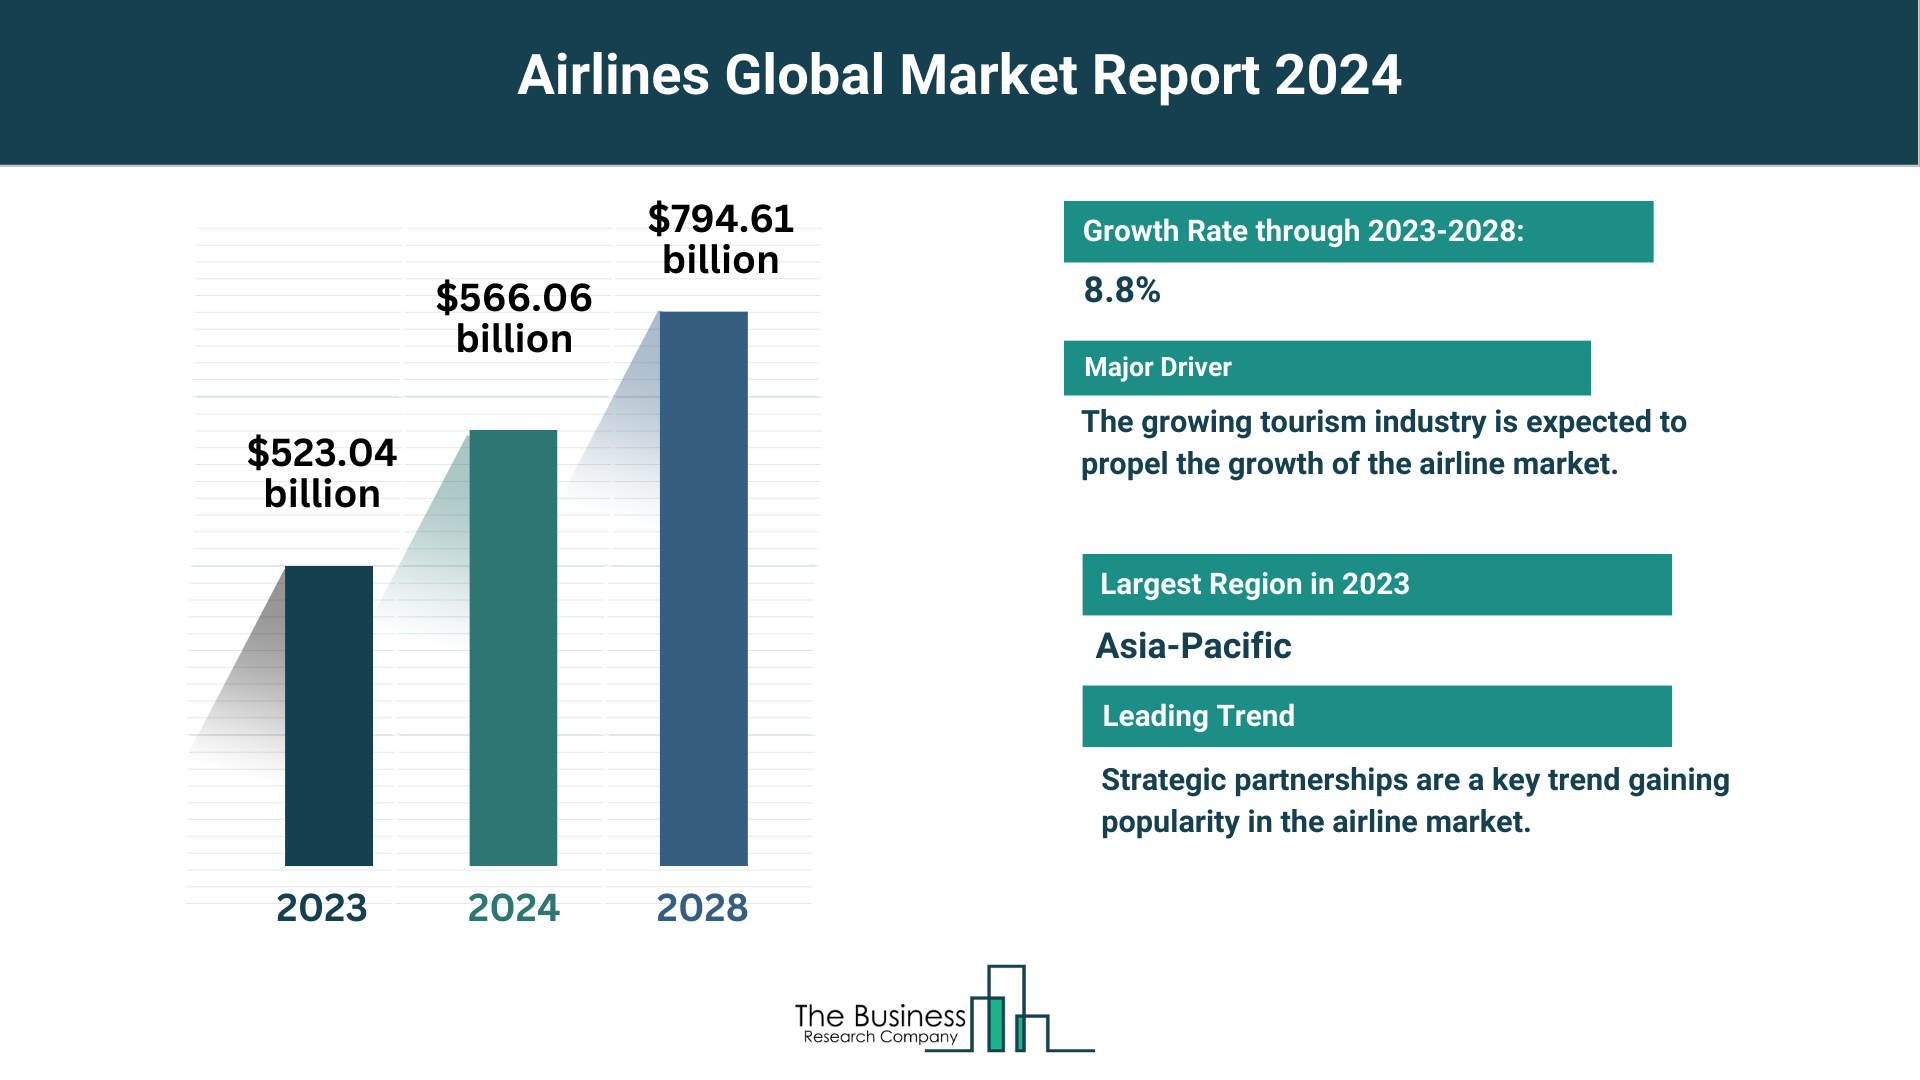 Global Airlines Market Overview 2024: Size, Drivers, And Trends